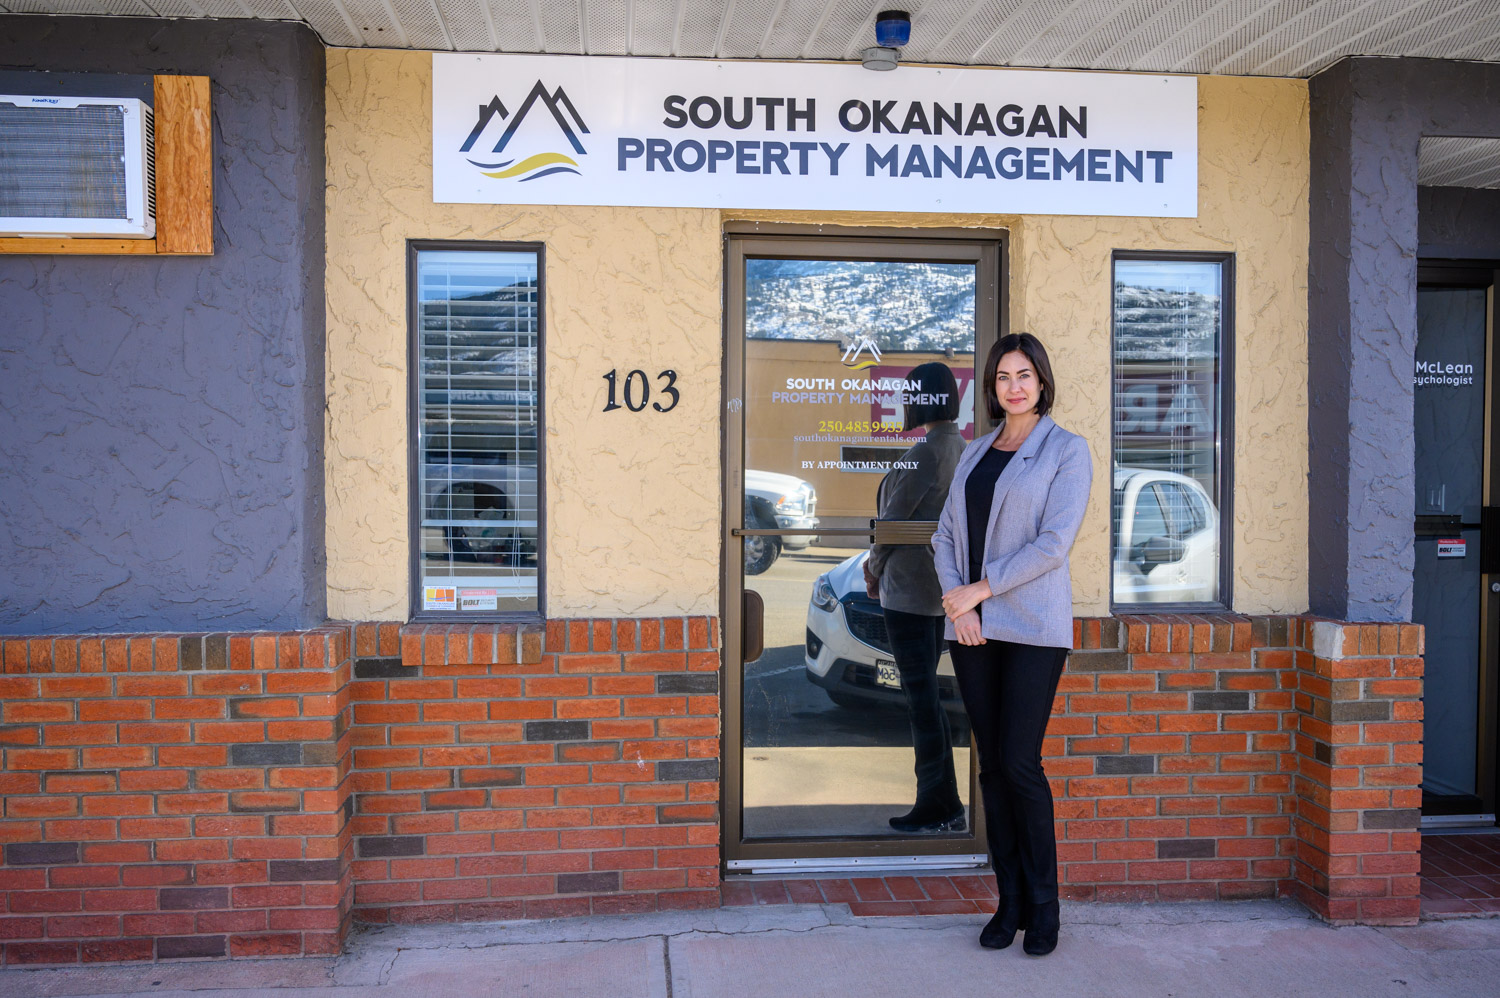 South Okanagan Property Management expanding its services up the valley